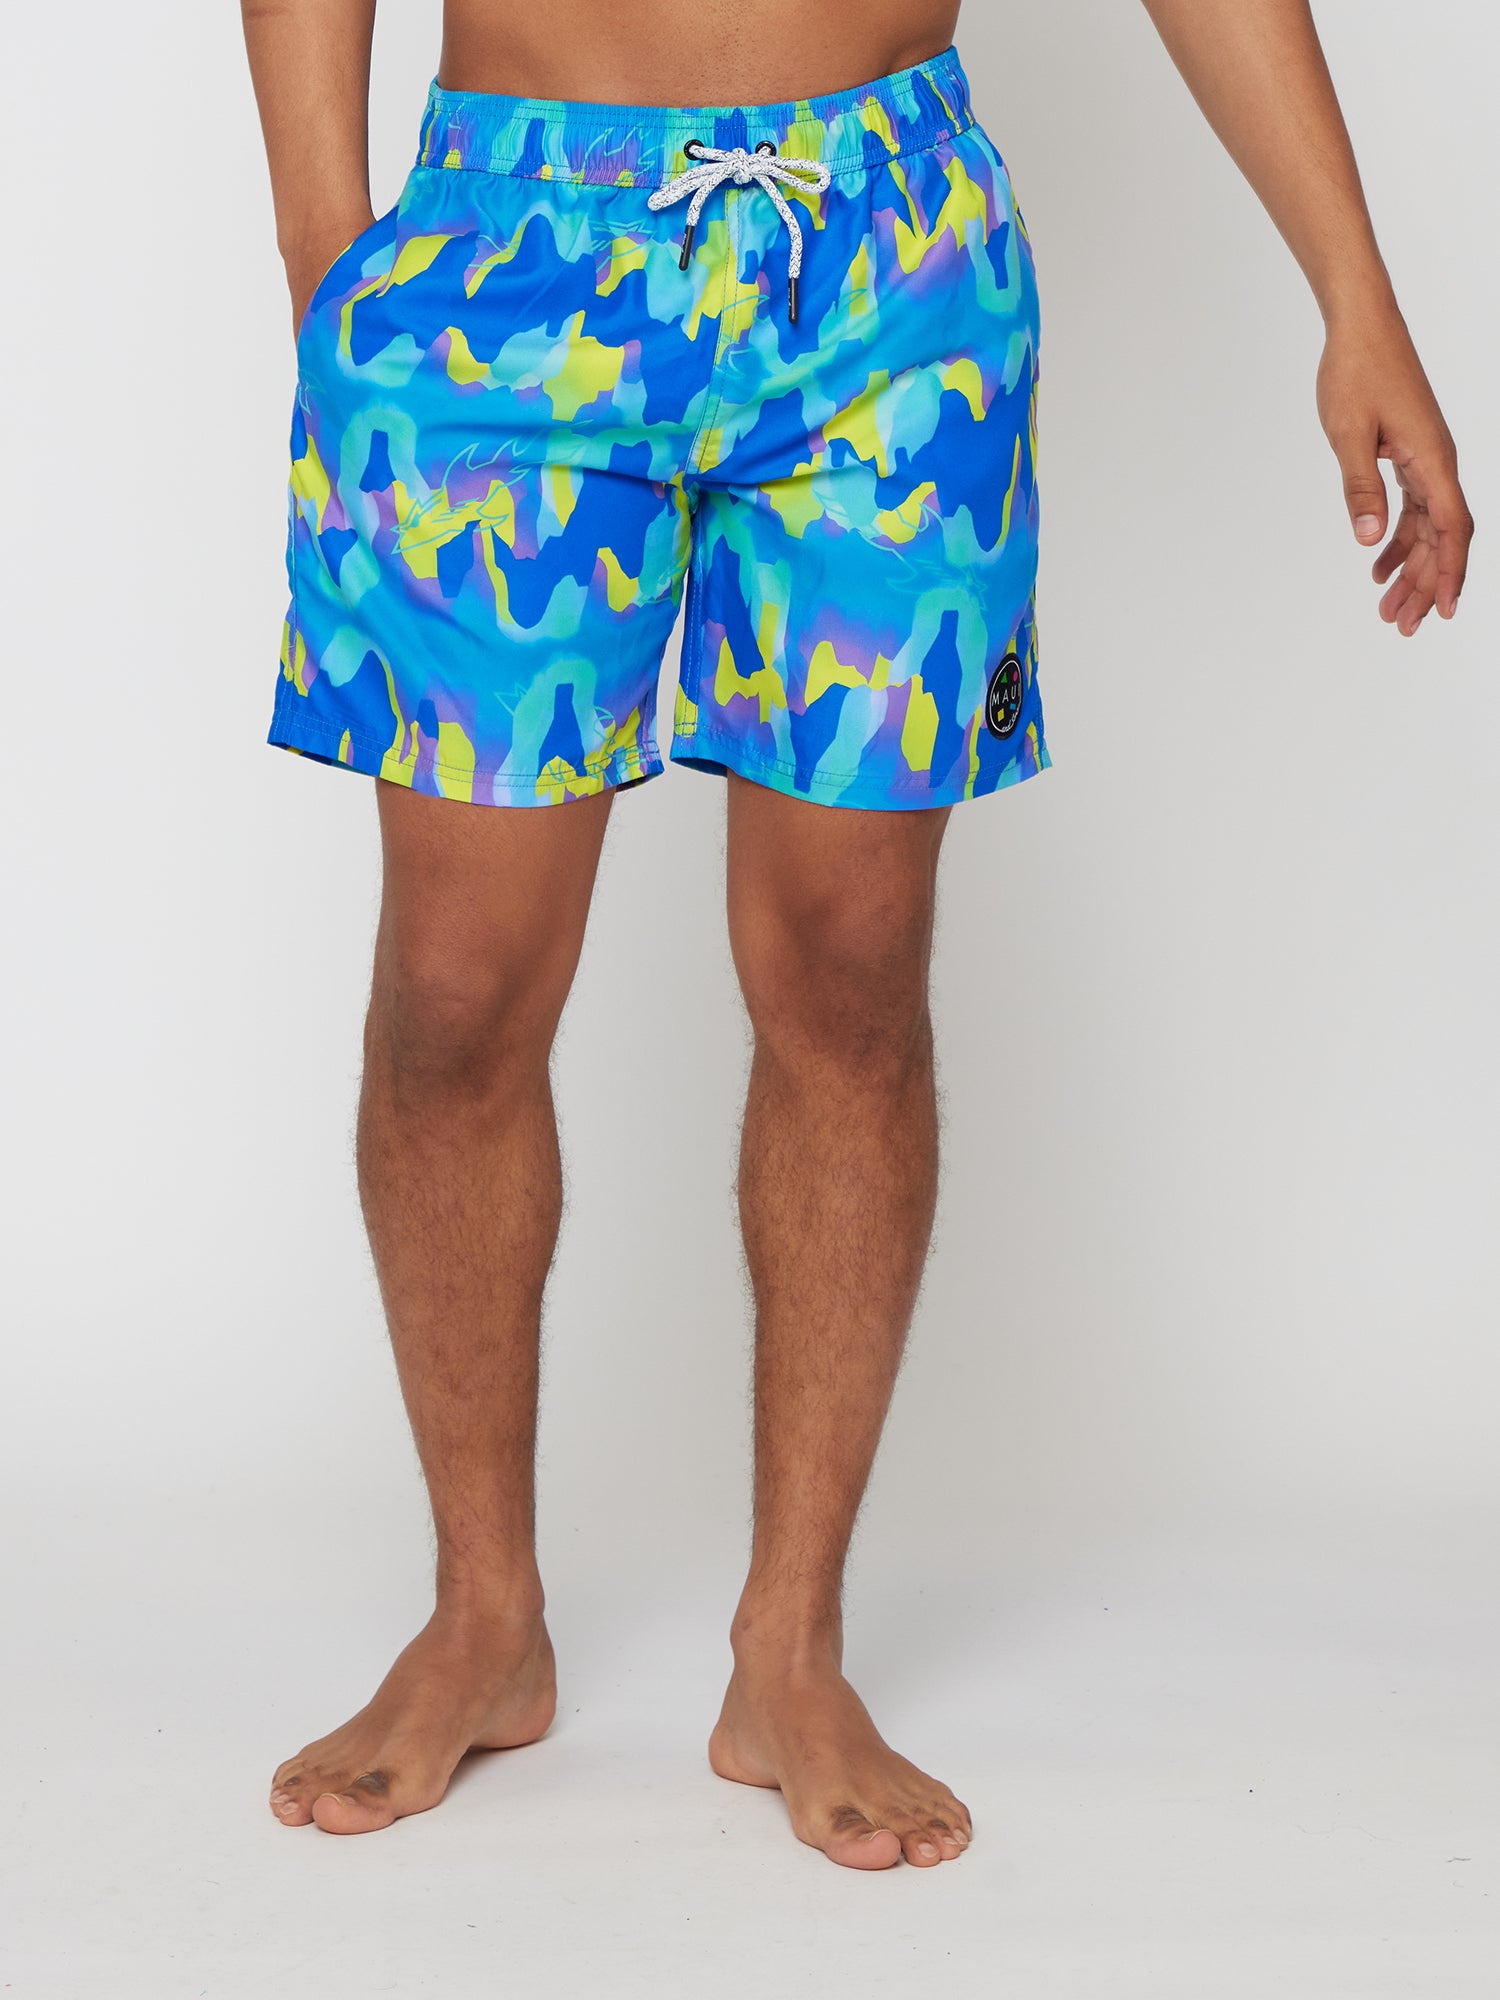 Volcanic Eruption Pool Shorts in Blue